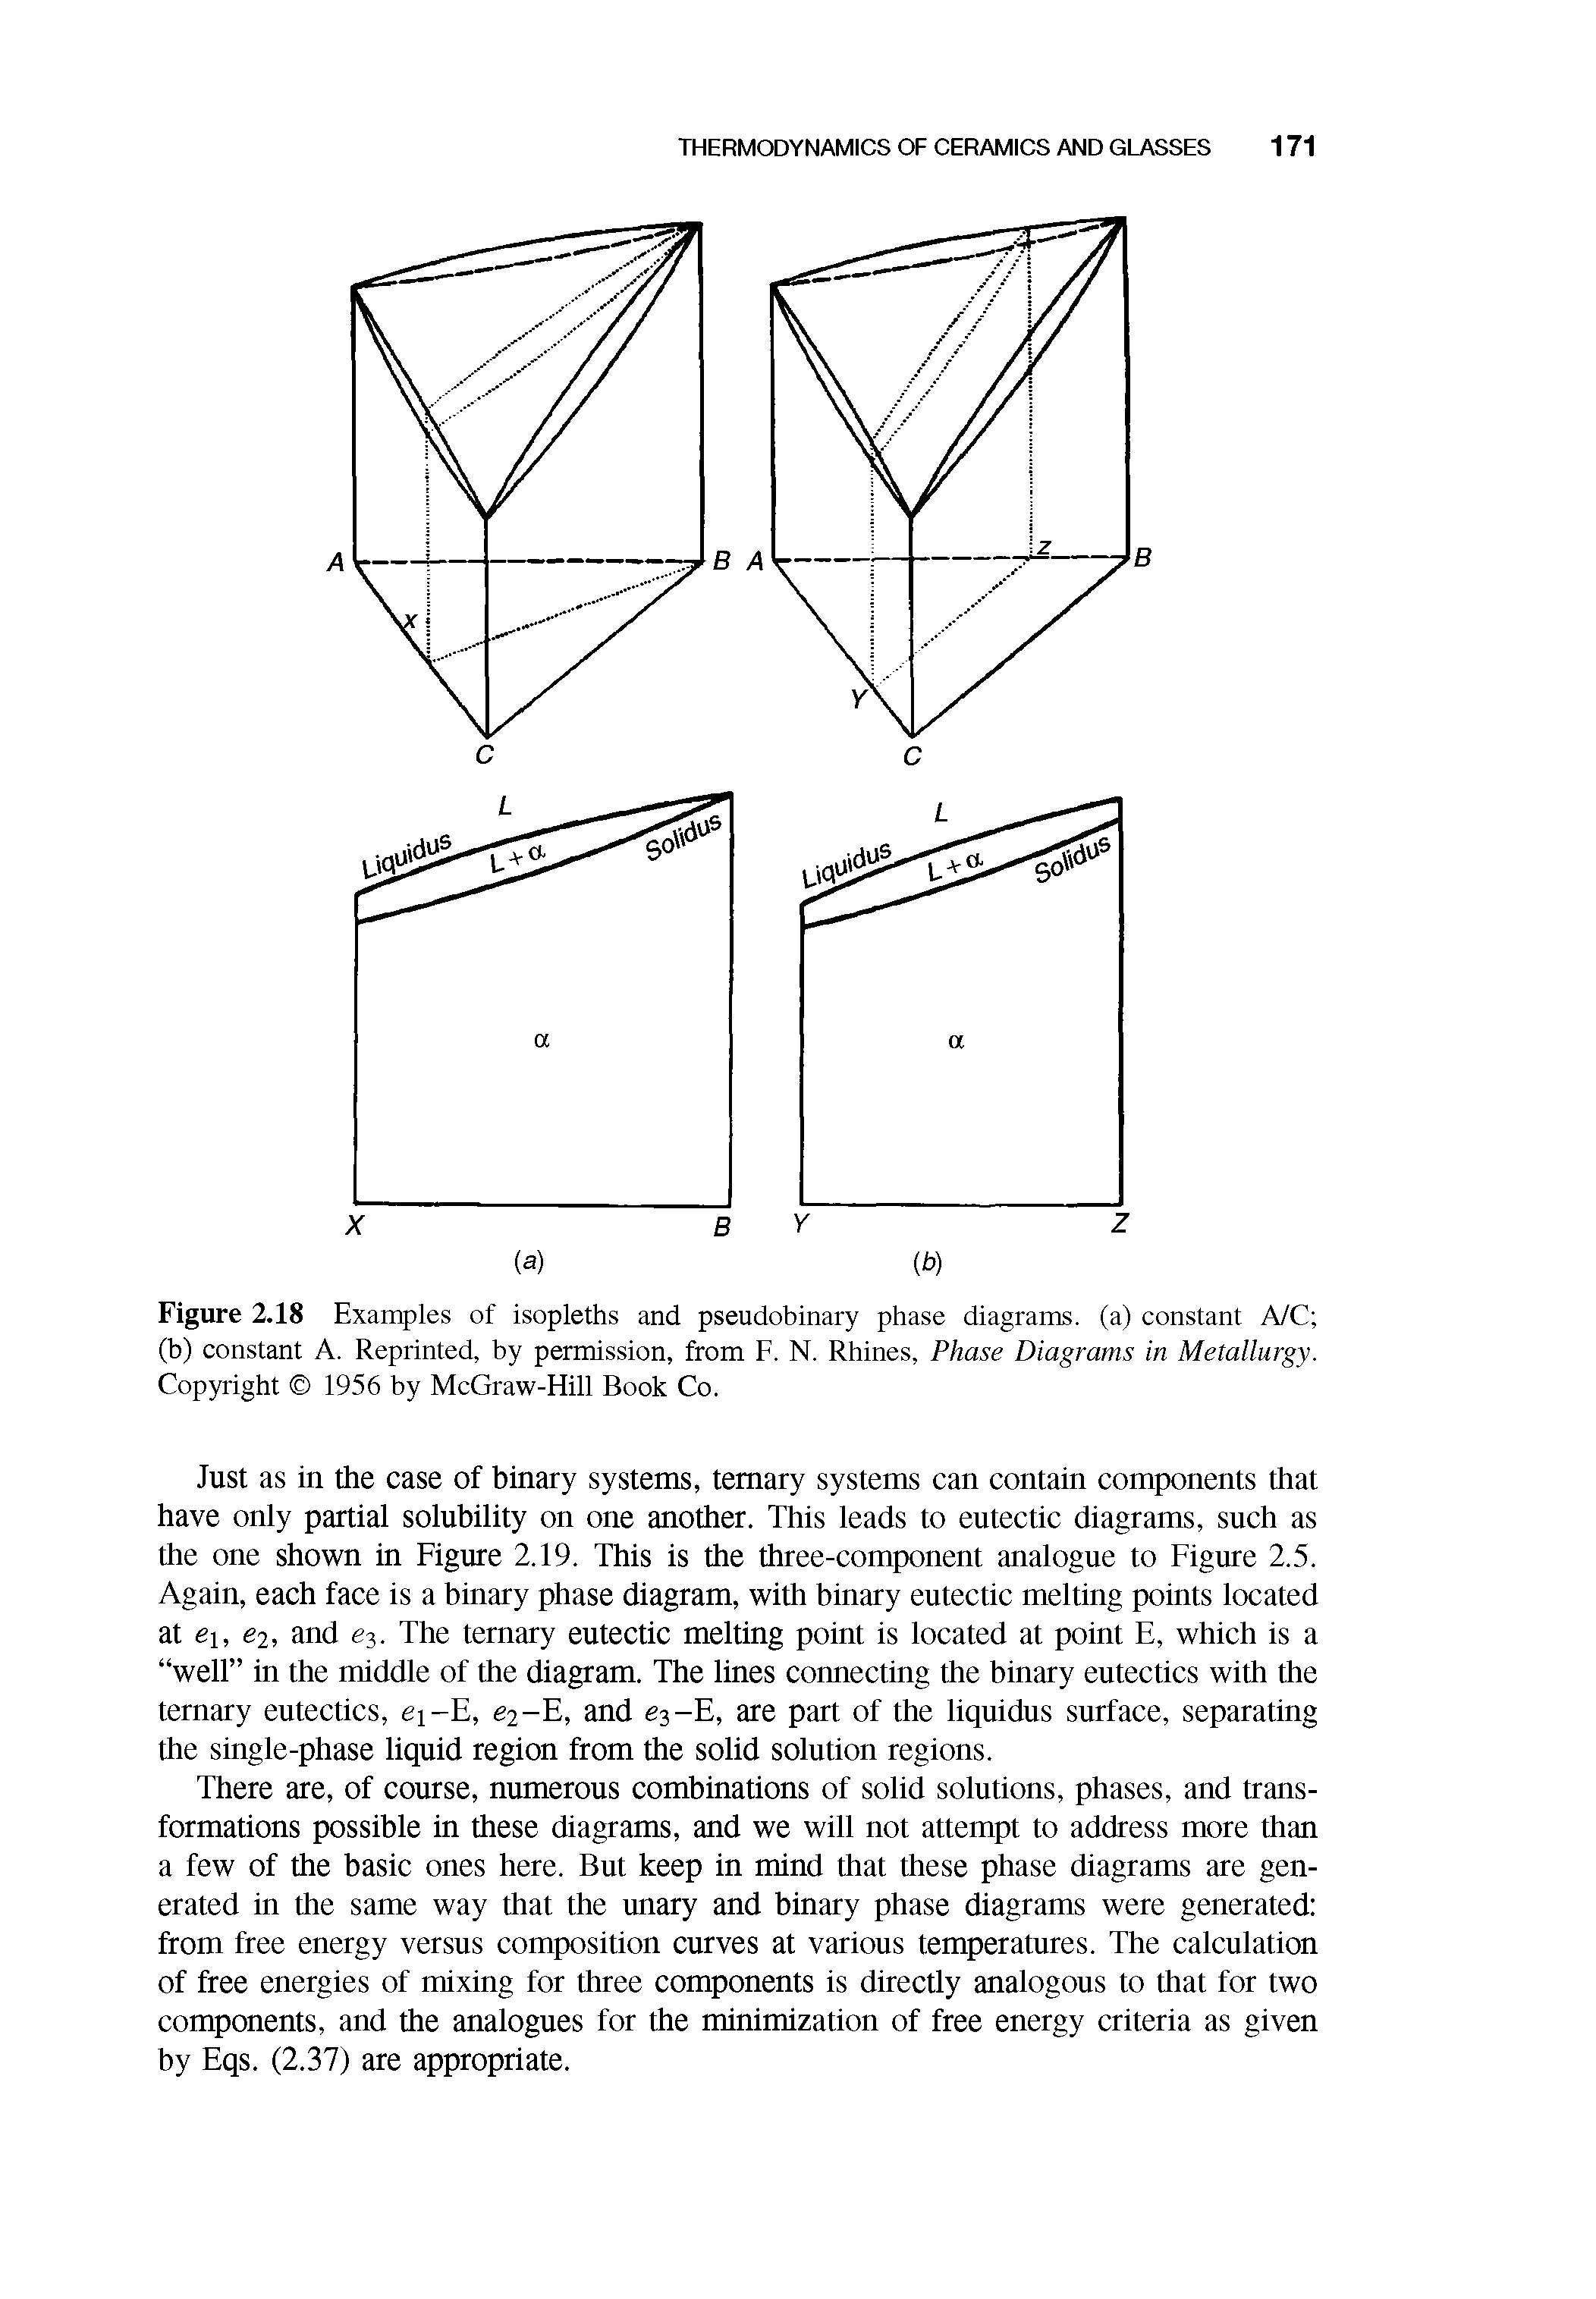 Figure 2.18 Examples of isopleths and pseudobinary phase diagrams, (a) constant A/C (b) constant A. Reprinted, by permission, from F. N. Rhines, Phase Diagrams in Metallurgy. Copyright 1956 by McGraw-Hill Book Co.